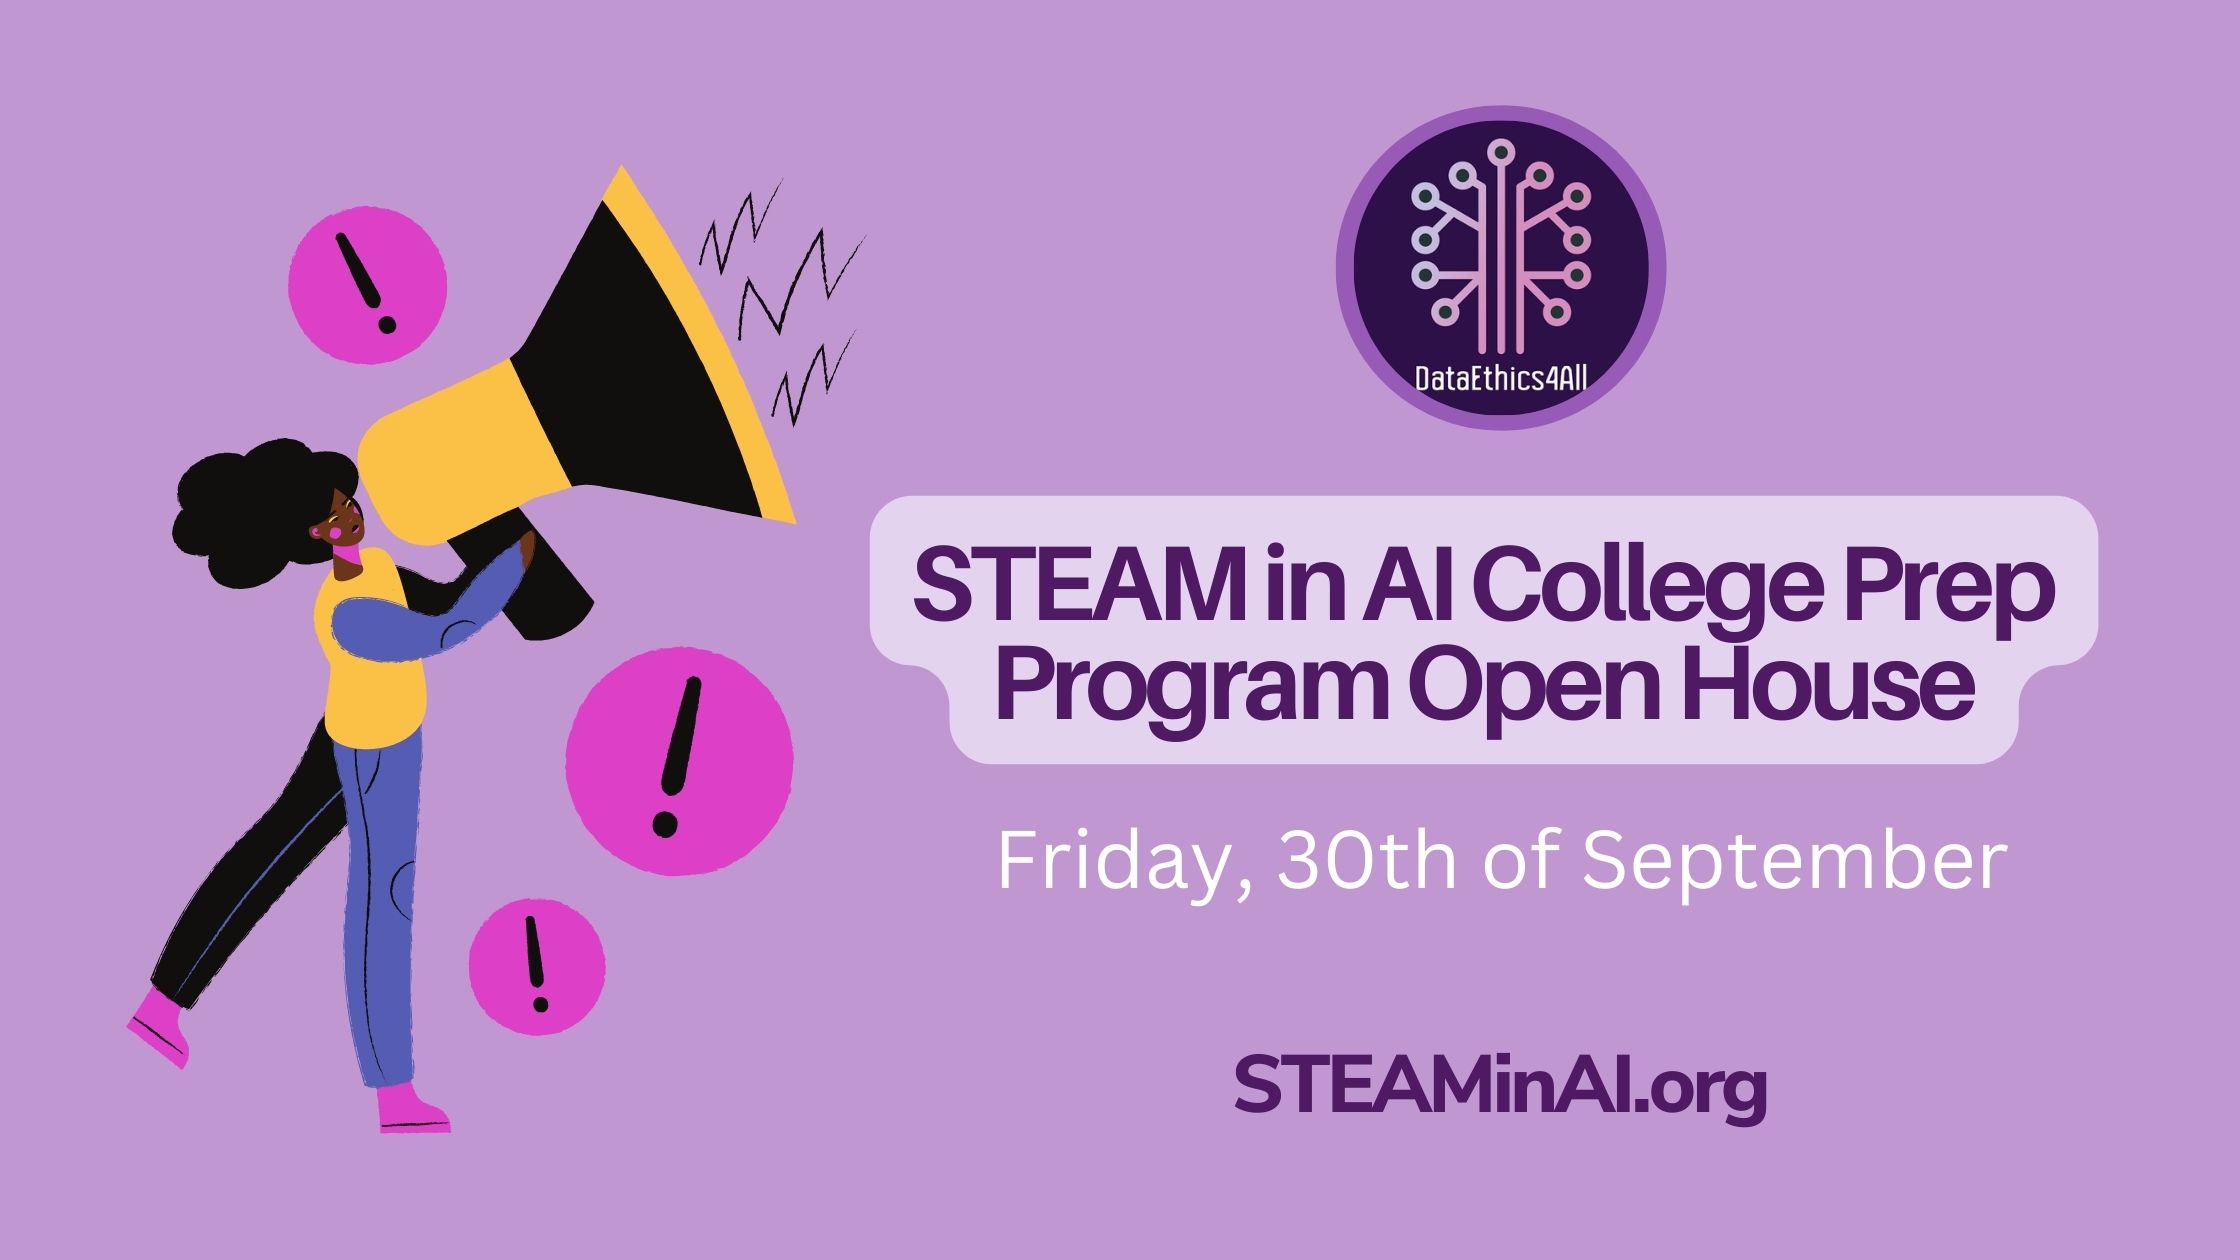 Announcement for the STEAM in AI College Prep Program Open House on Friday, the 30th of September